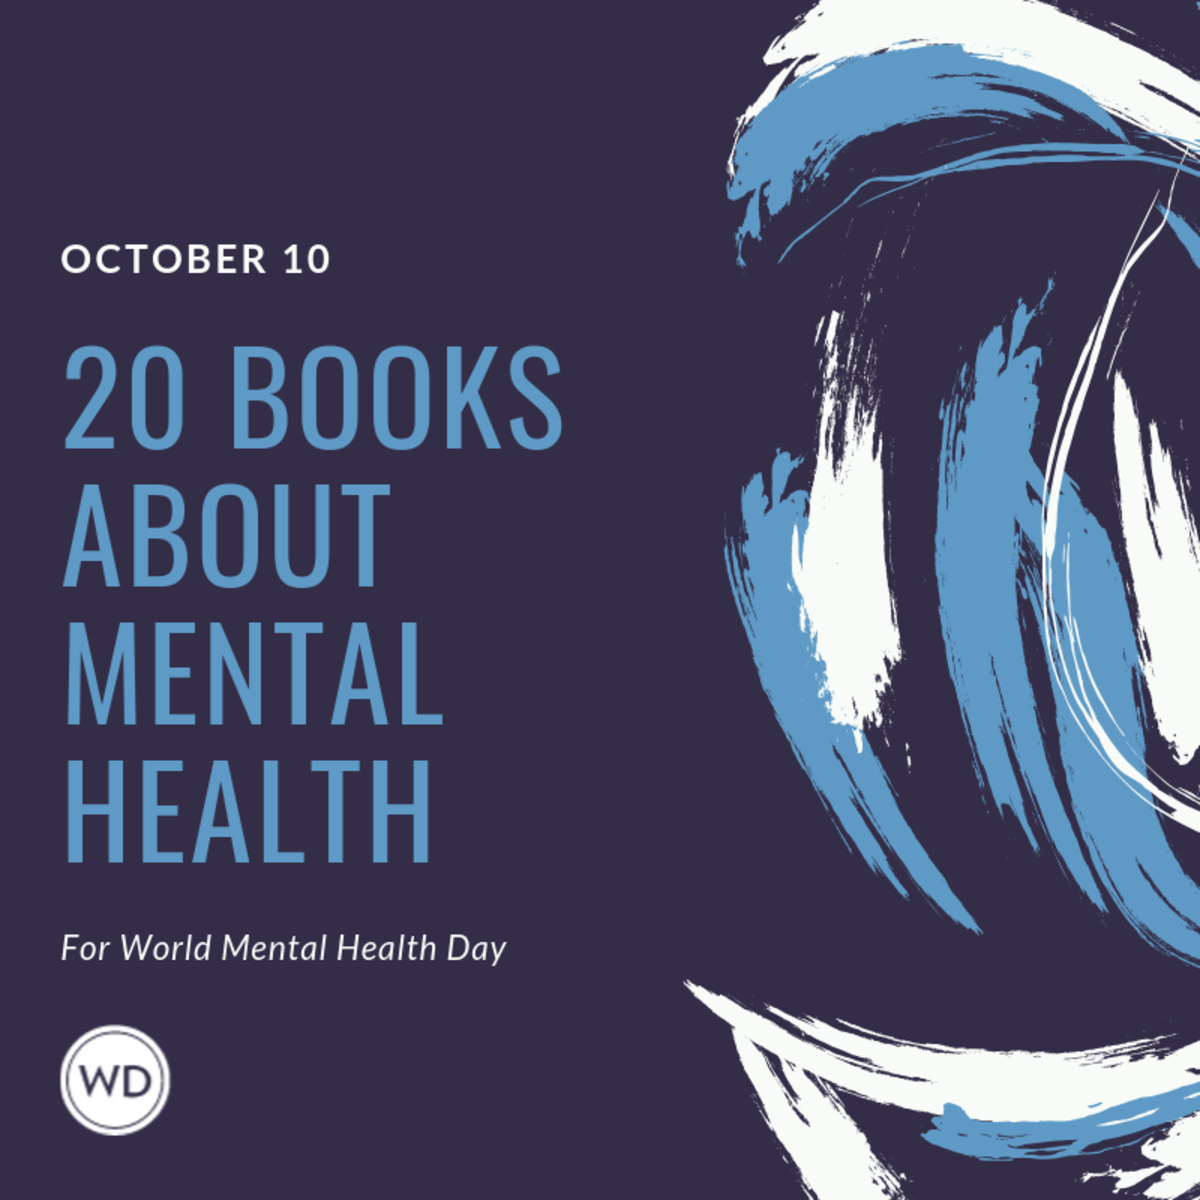 Mental Health Day Book Recommendations